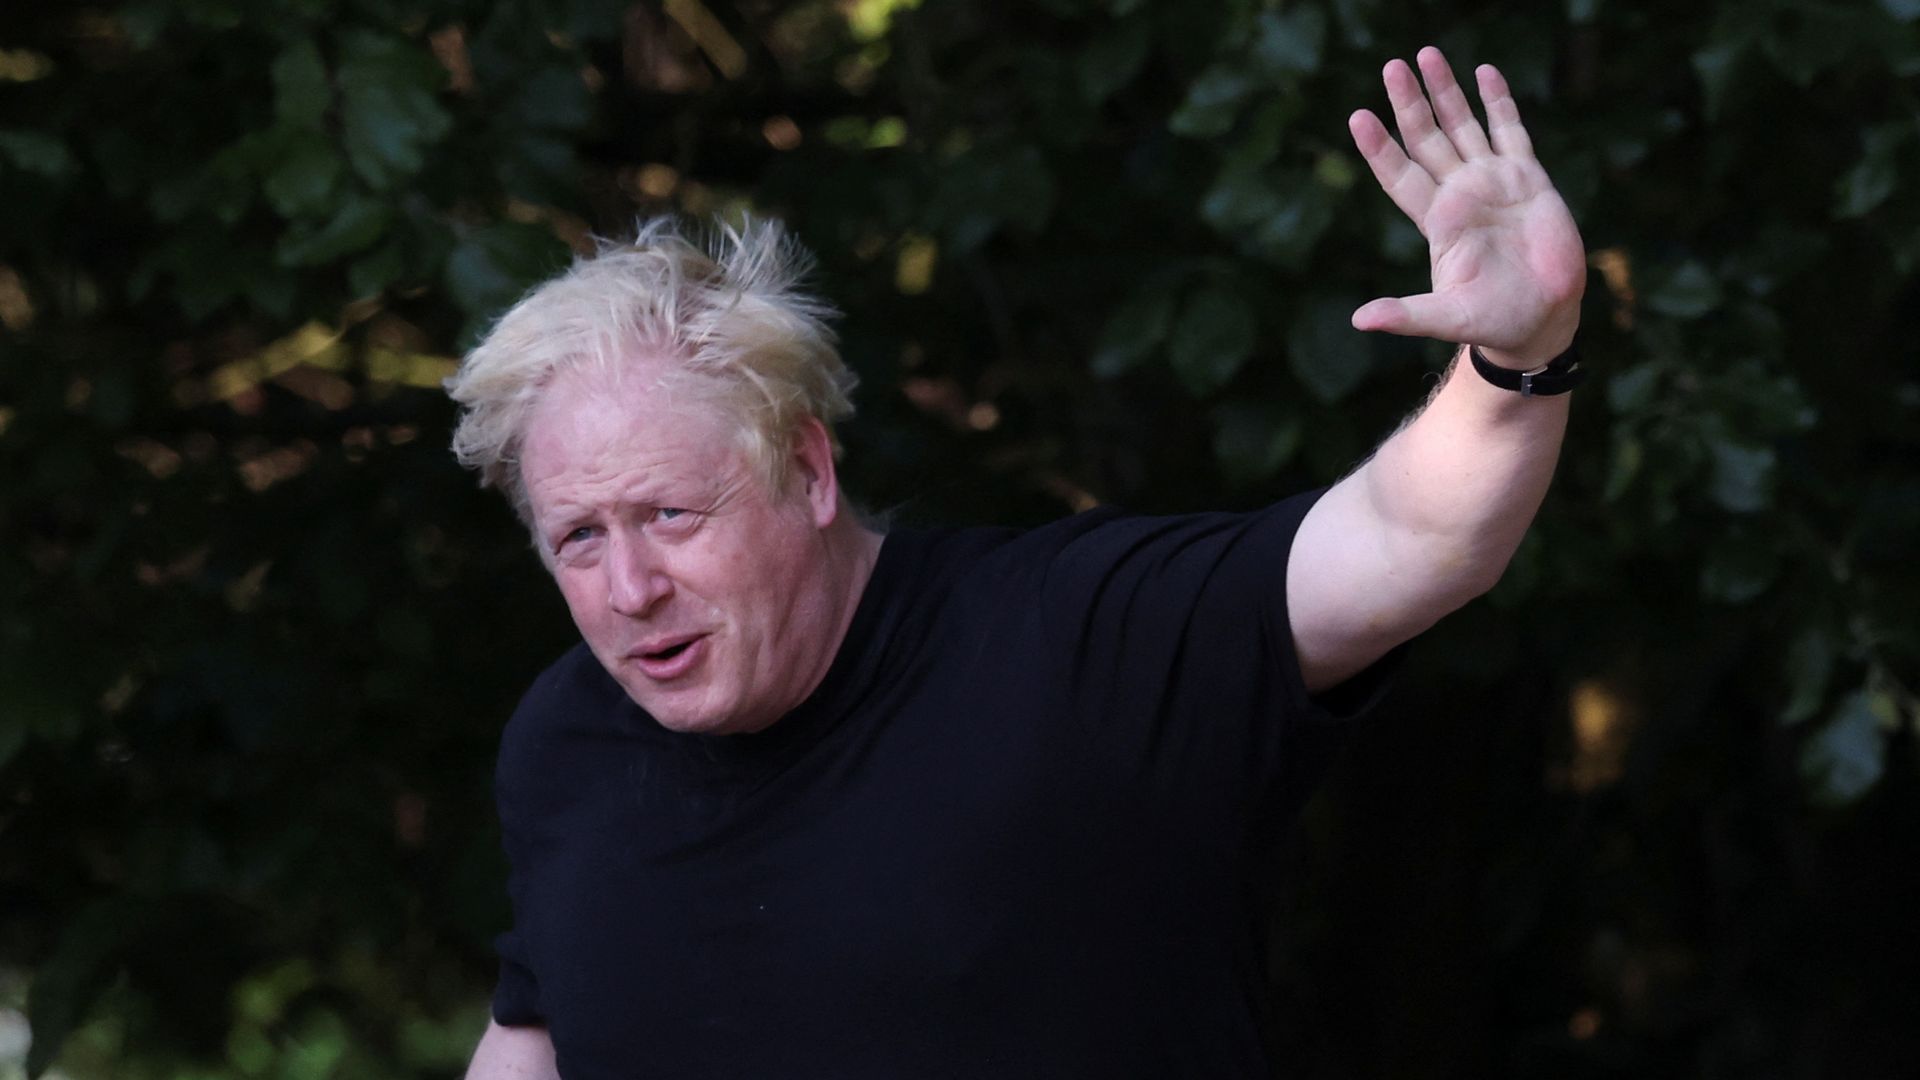 Johnson thanks villagers who refused to let him vote without photo ID...